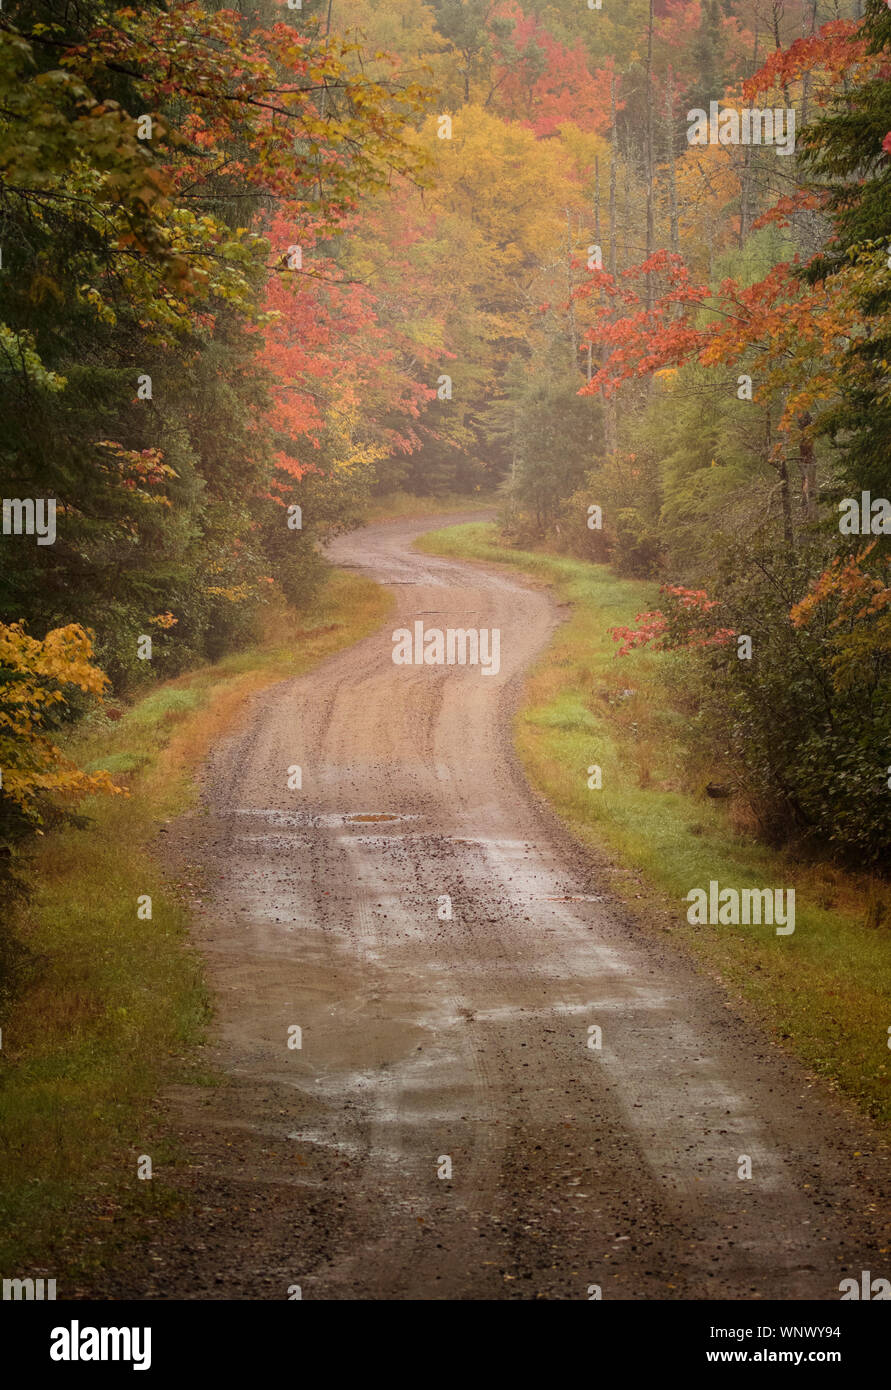 Country roads drive past endless colorful fall leaves during autumn time in New England. Colorful changing leaves frame the dirt roads; leaf peeping Stock Photo